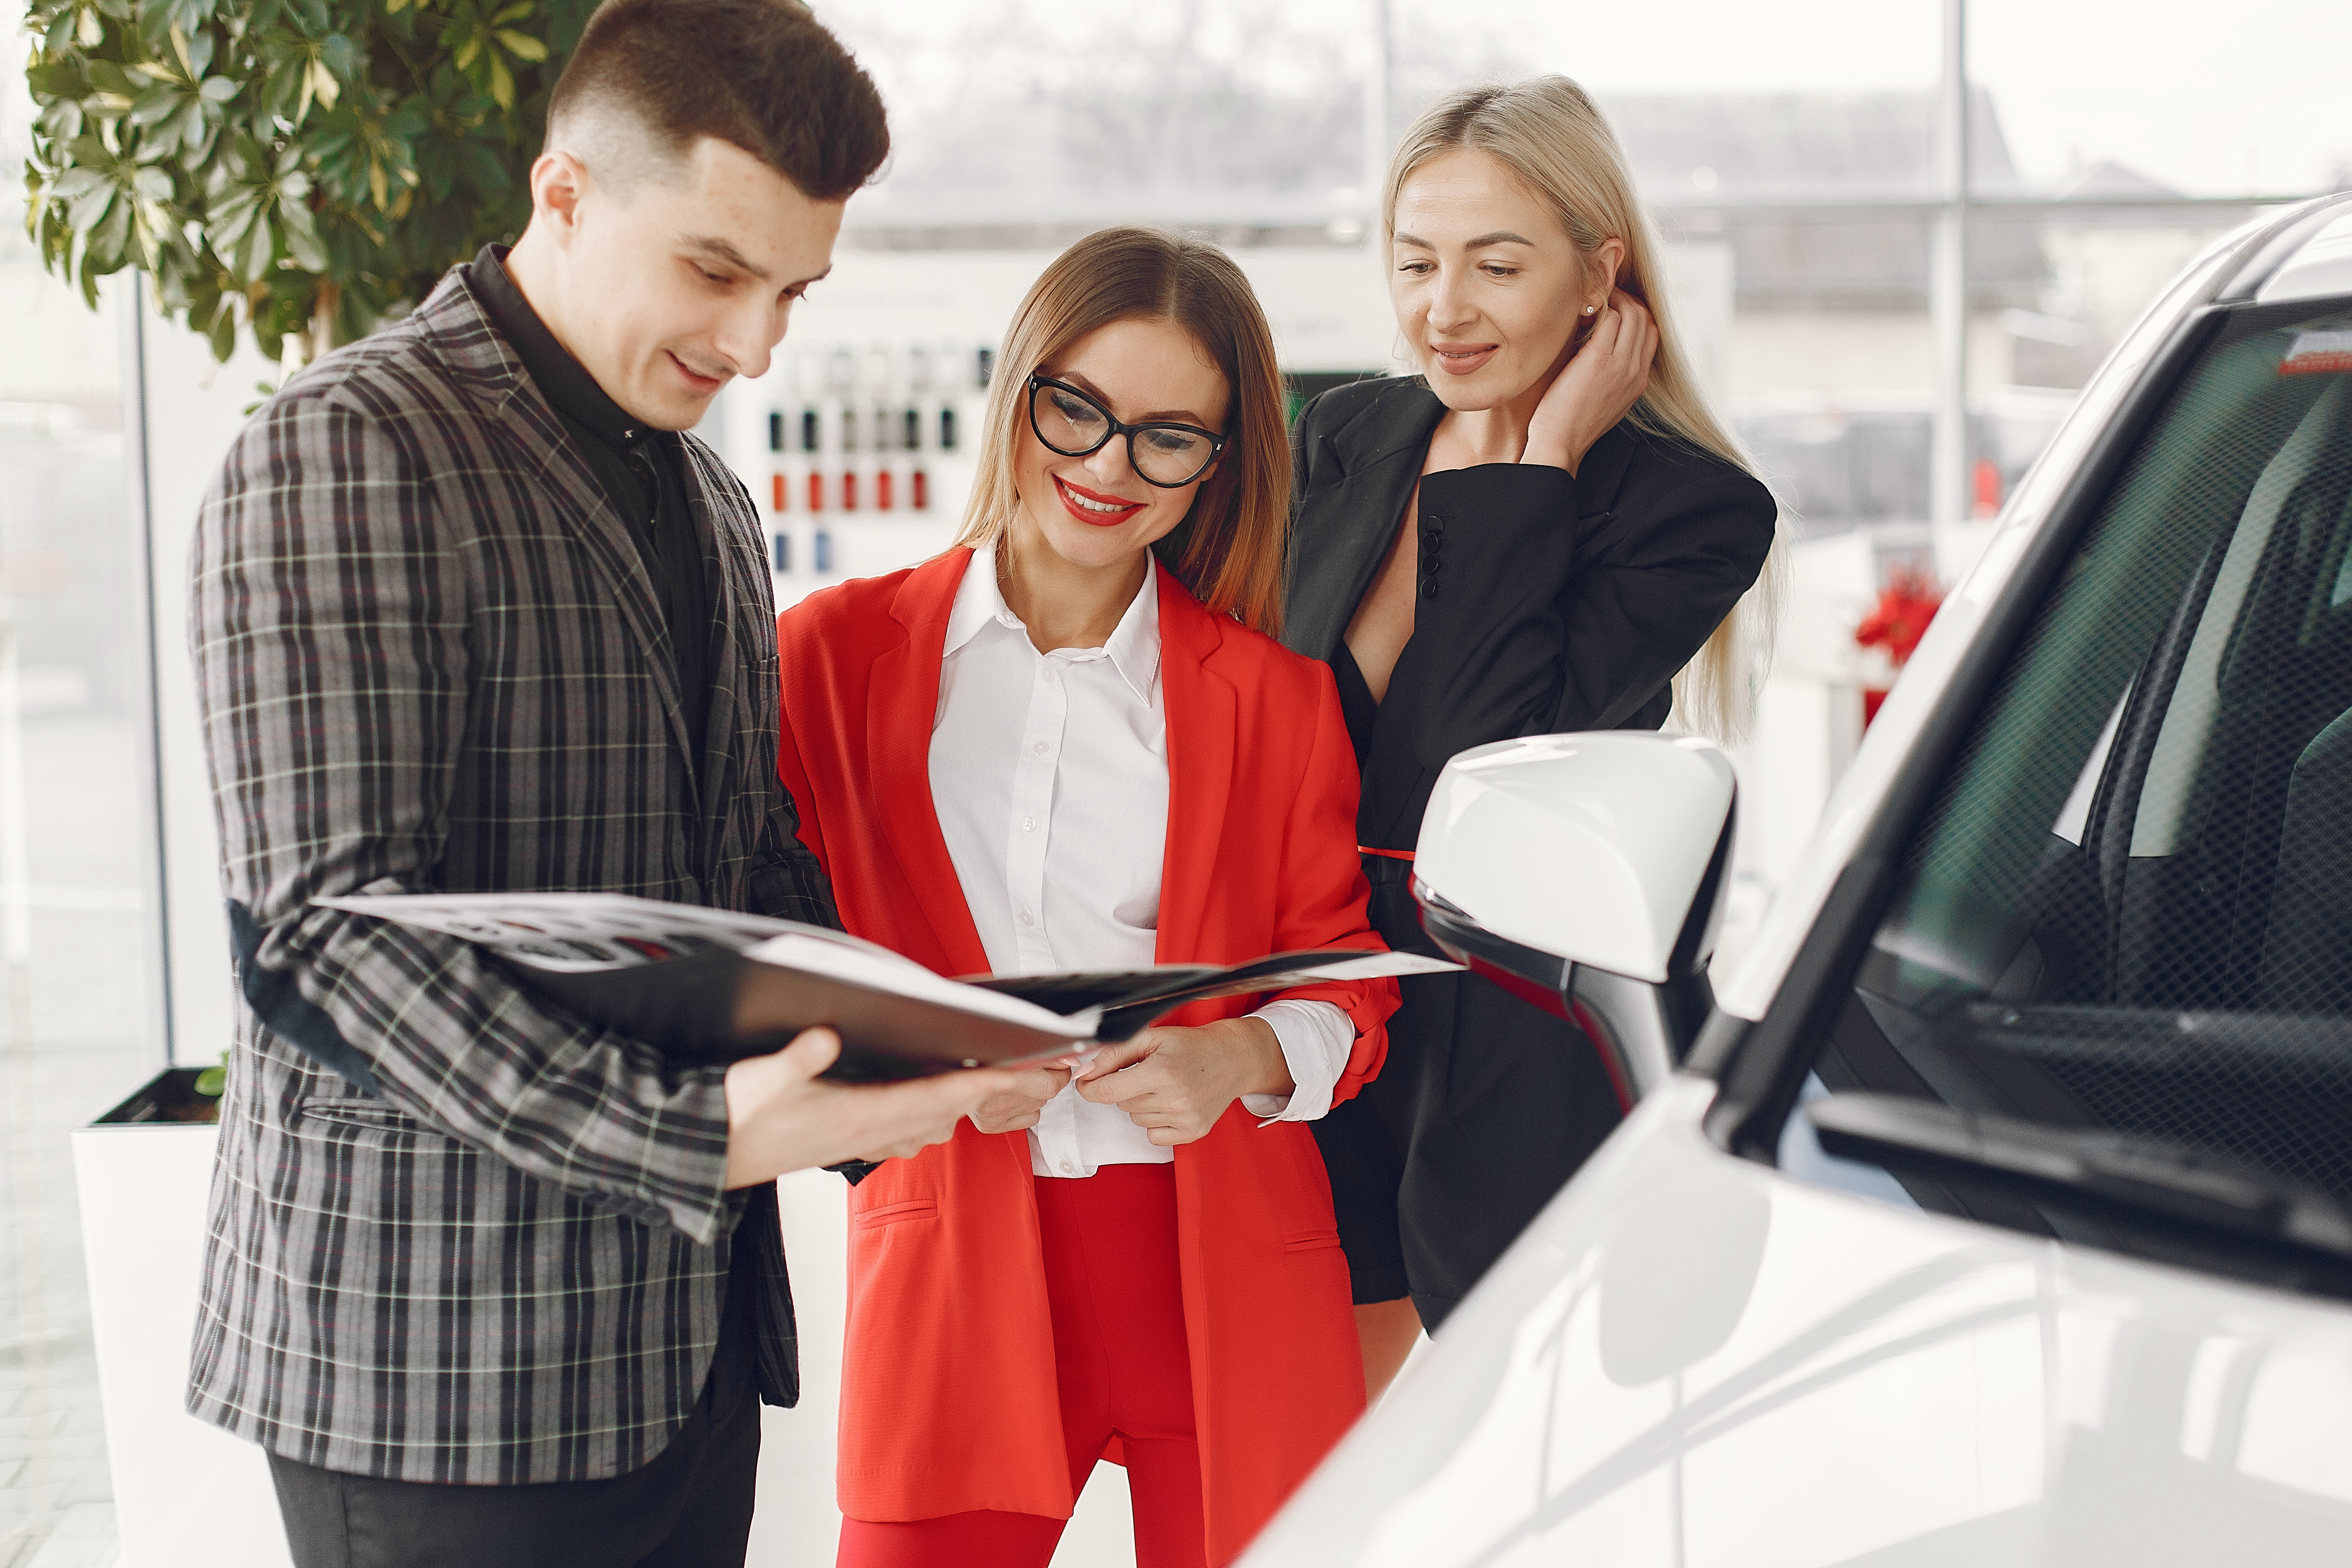 Car Title Loans Kamloops Provide Essential Support for Everyday Expenses